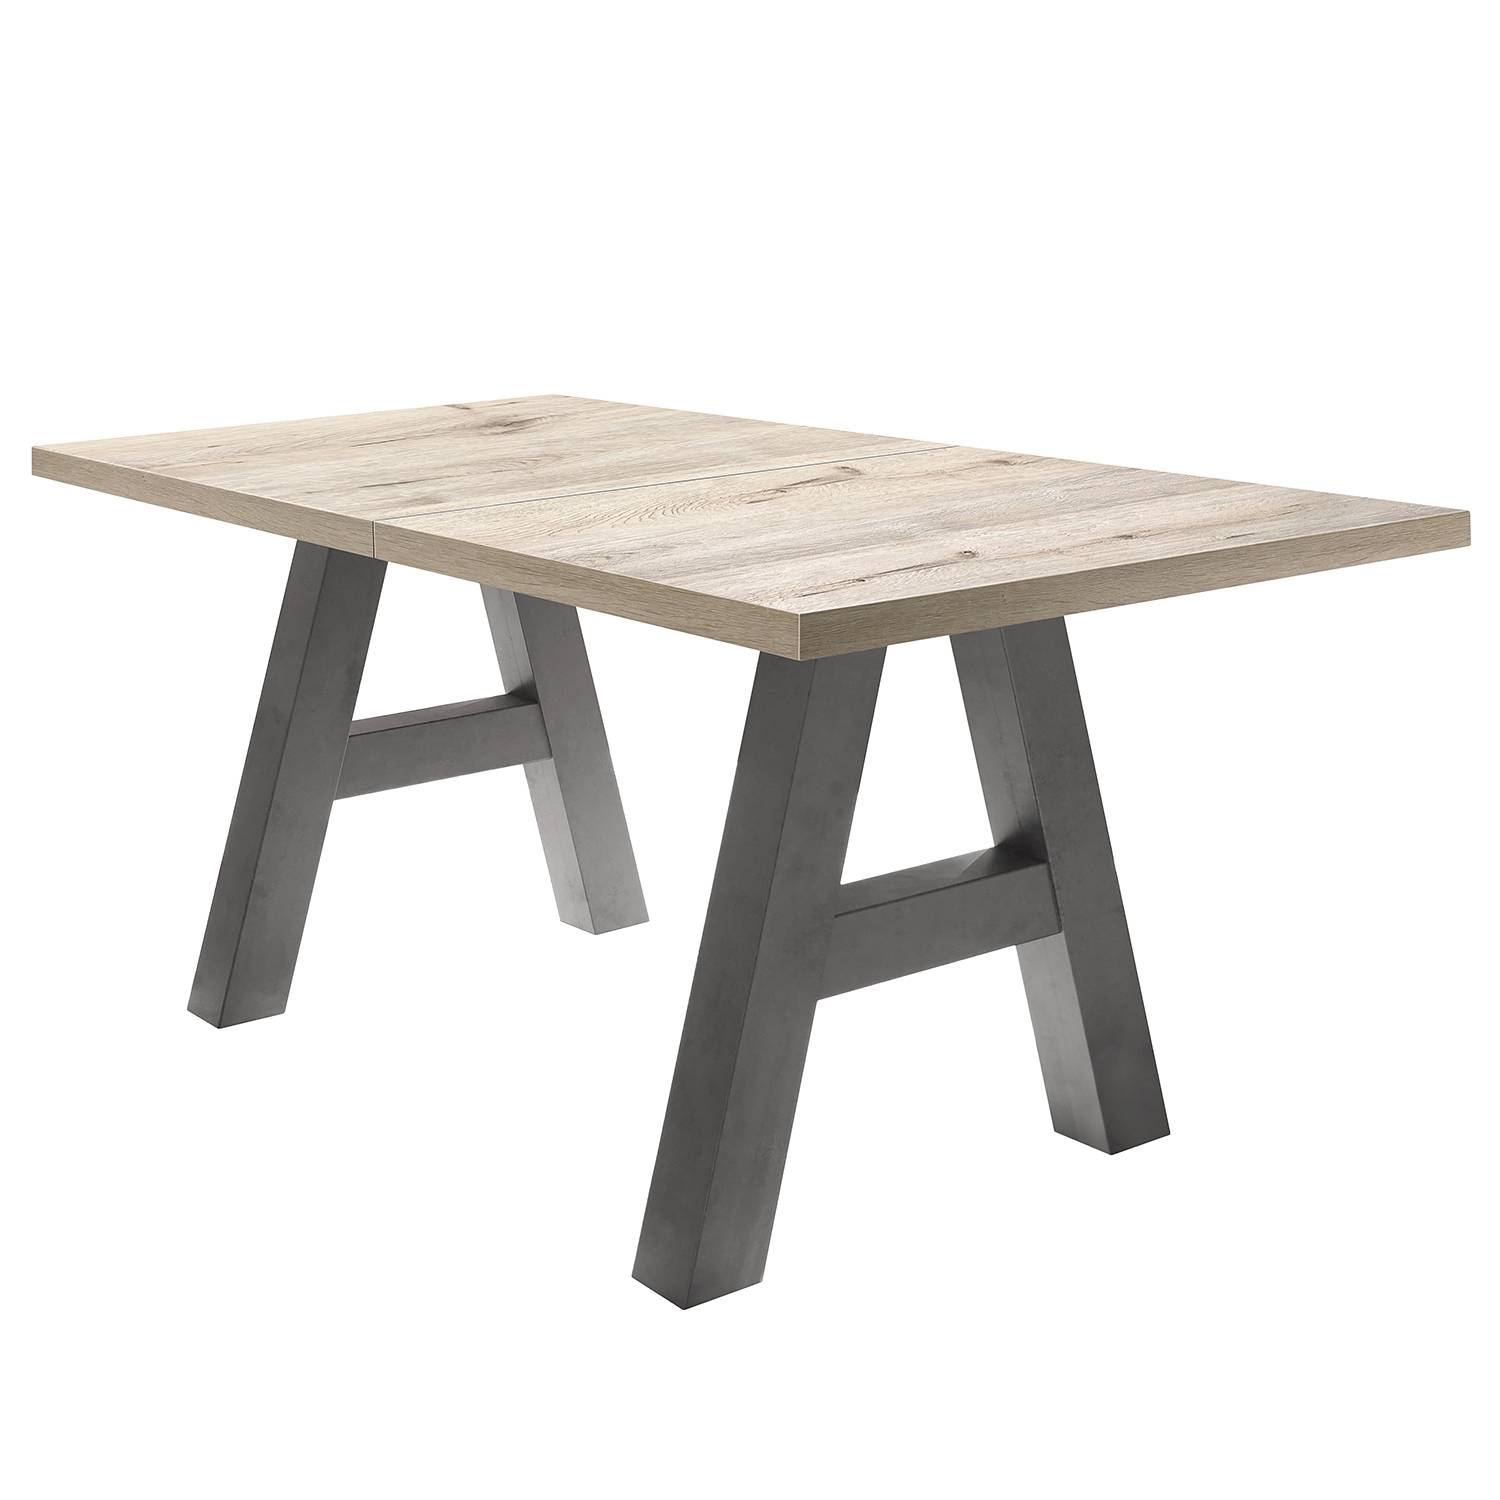 Image of Table extensible Leeton l 000000001000121542